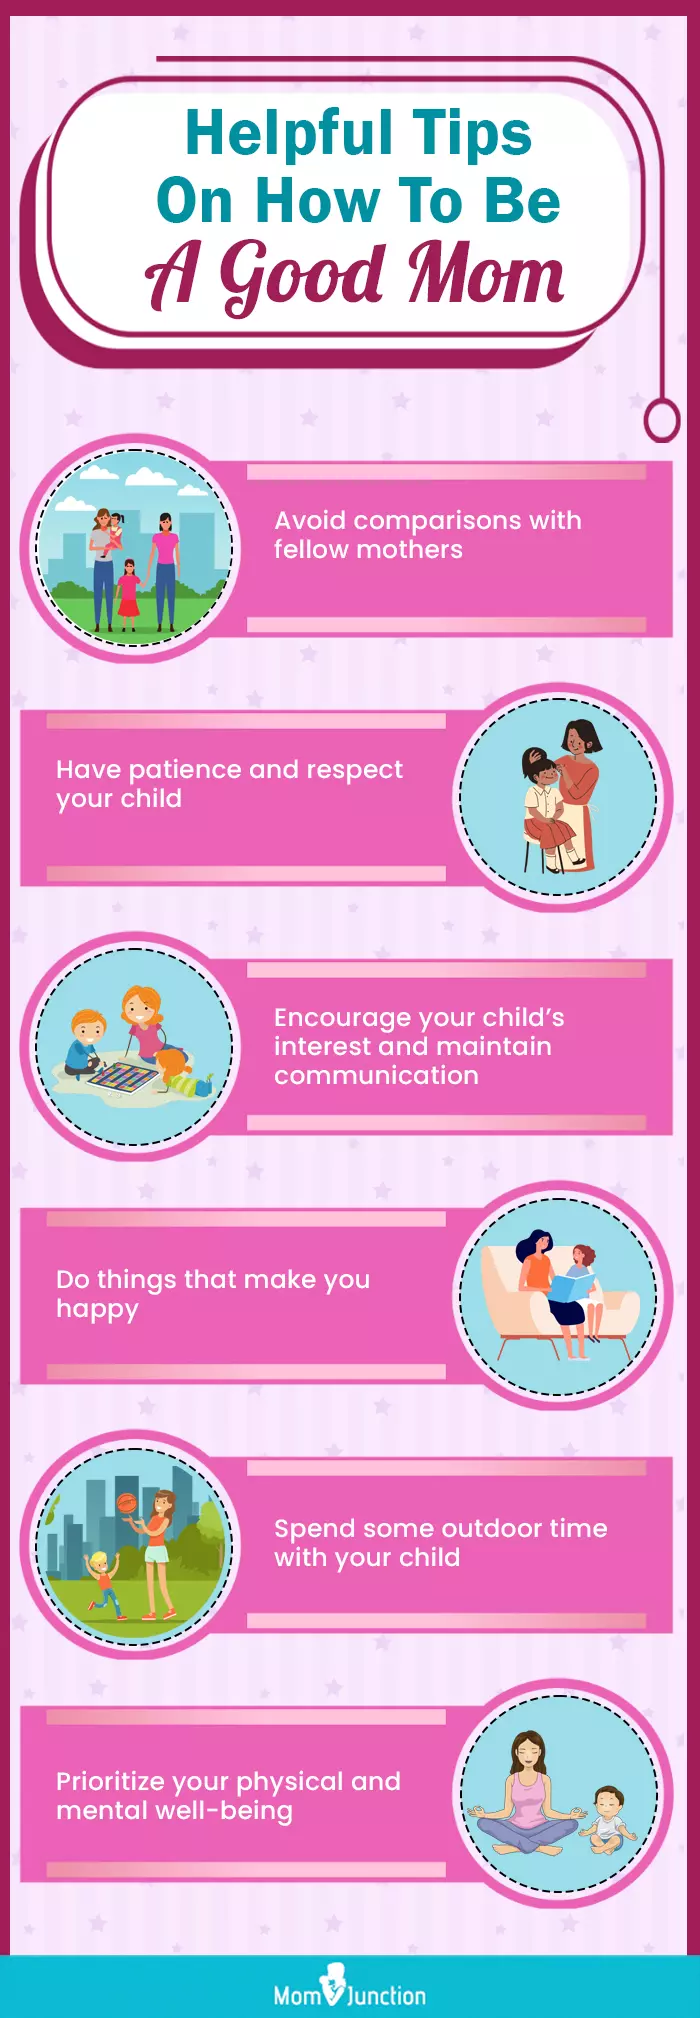 helpful tips on how to be a good mom (infographic)